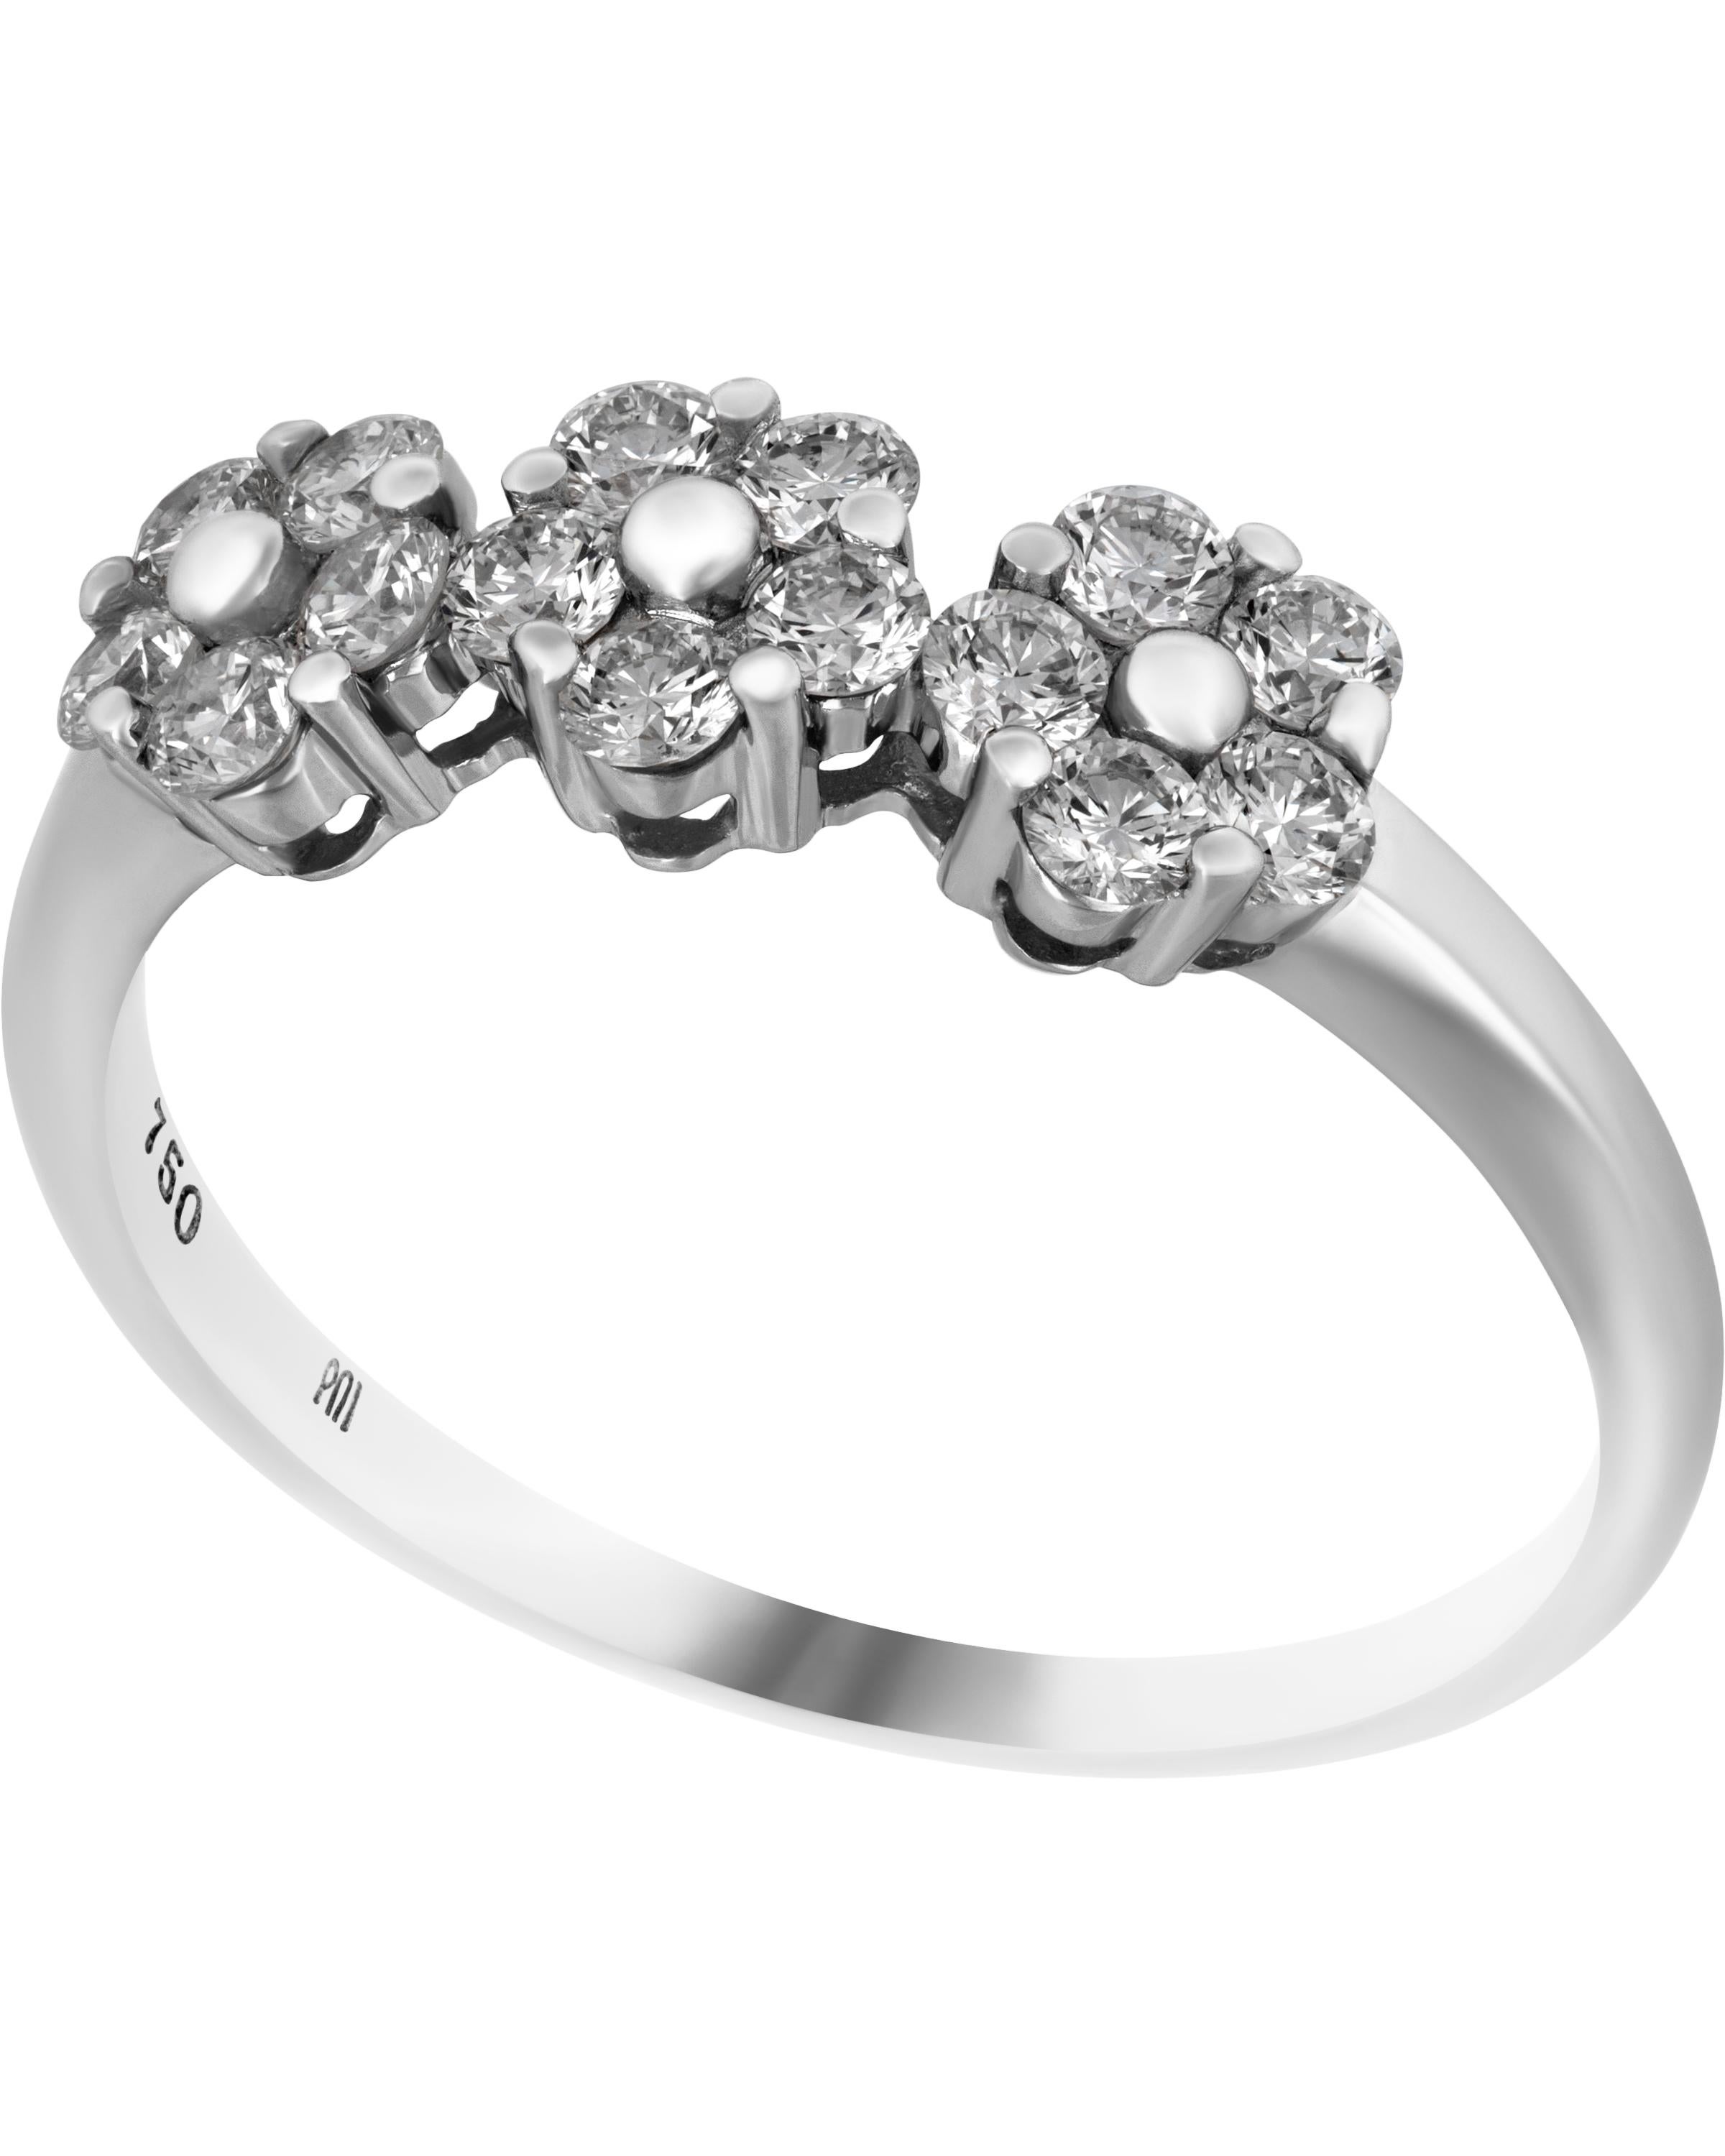 This beautiful Piero Milano 18K White Gold Band Ring features three luscious diamond flowers 0.53ct. tw. adorned with a beaded center of 18K White Gold. The ring size is 6.75 (53.8). The Band Width is 2.5mm. The Weight is 2.2g. Diamond Color: G-H.